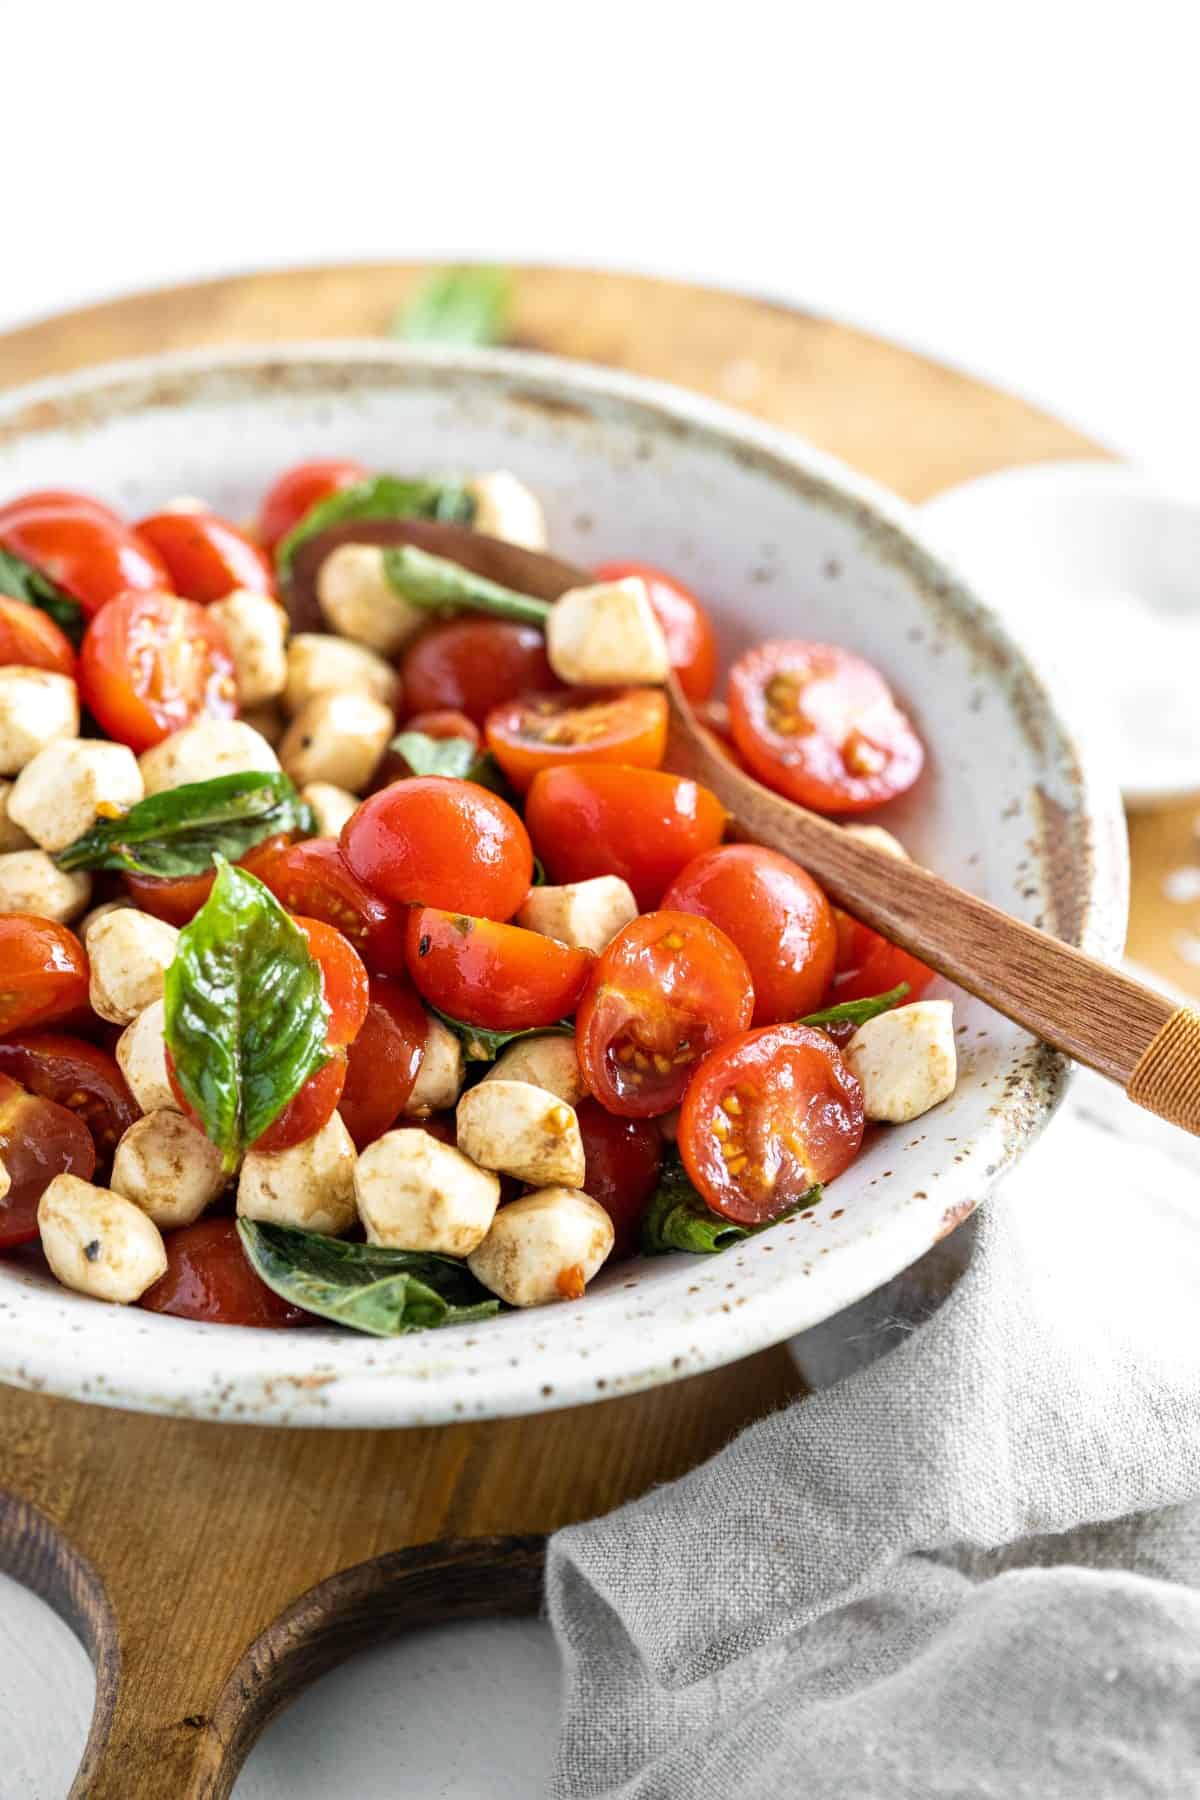 Caprese salad in a bowl with a wooden spoon